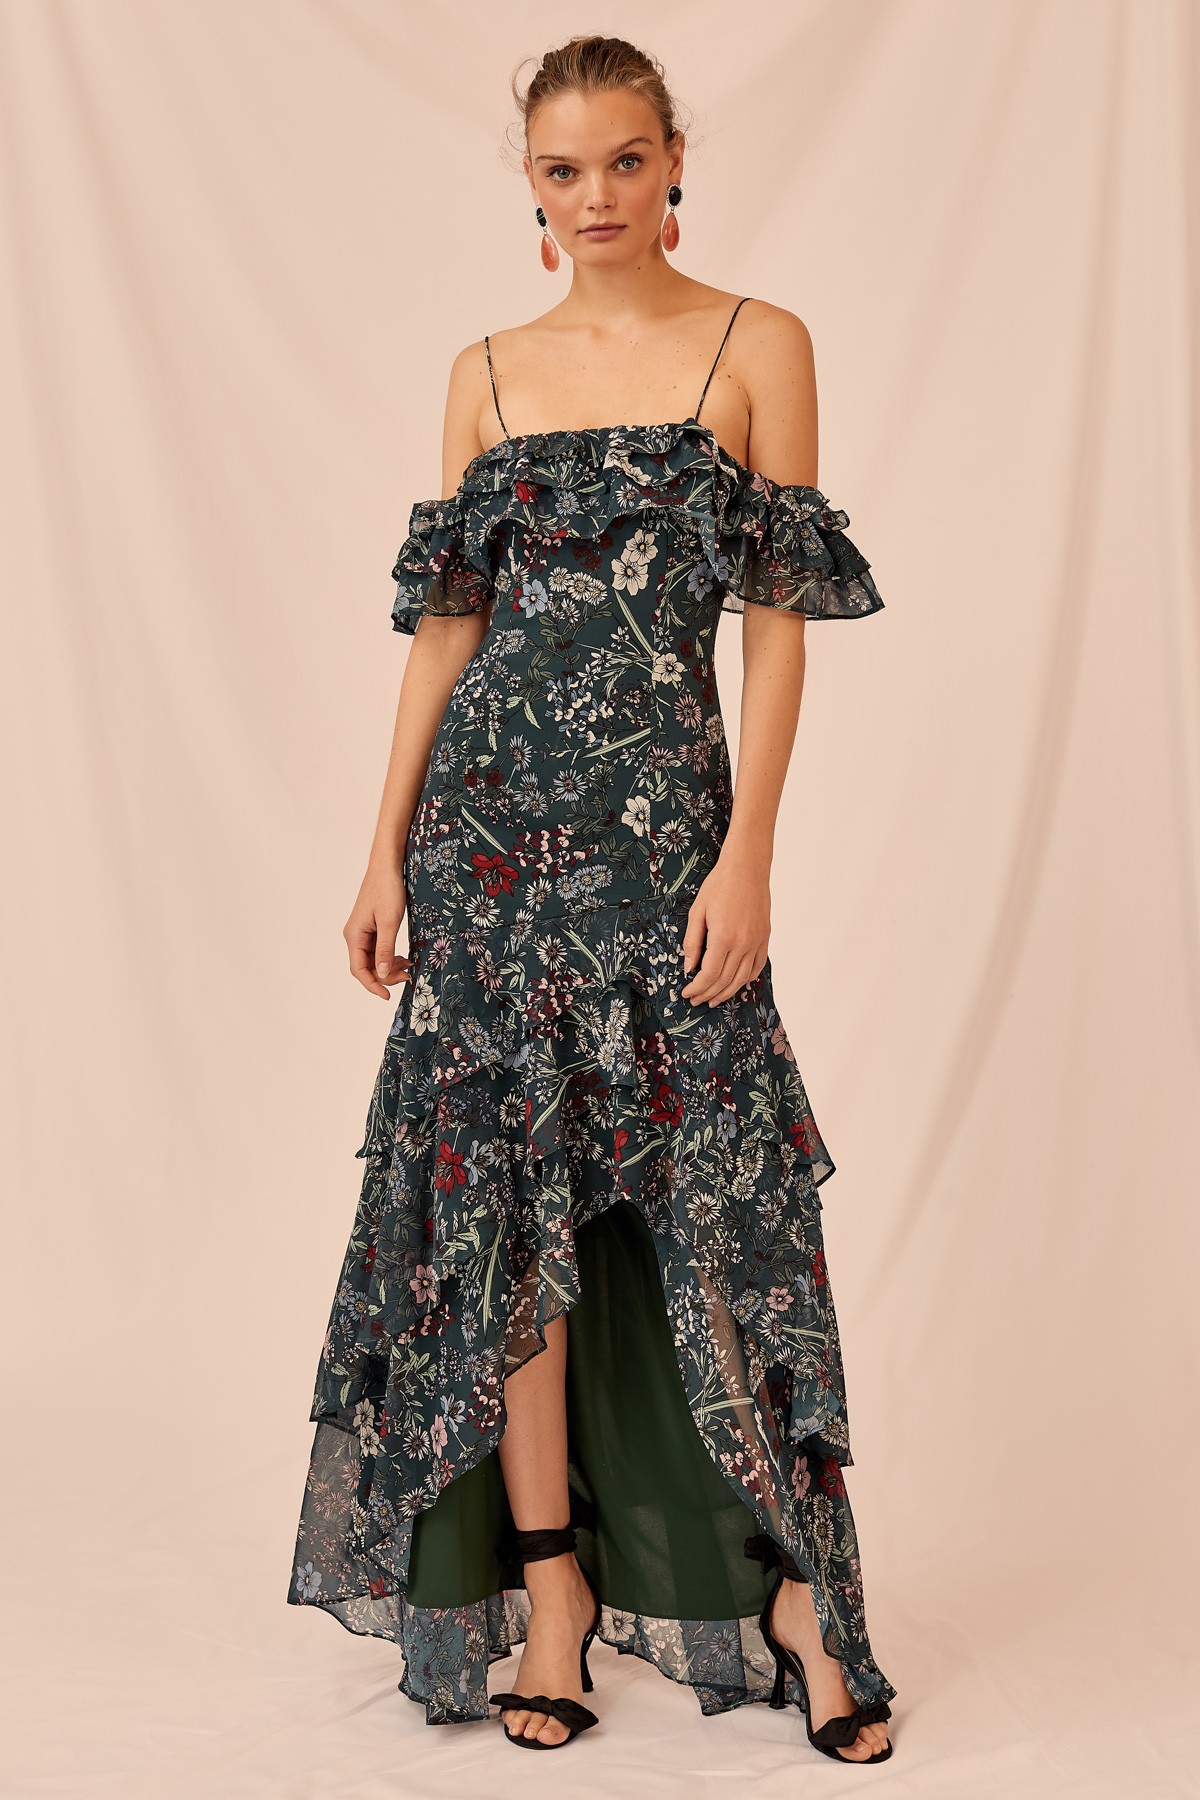 30190458_2_enchanted_midi_dress_302_forest_green_floral_g_1536_4